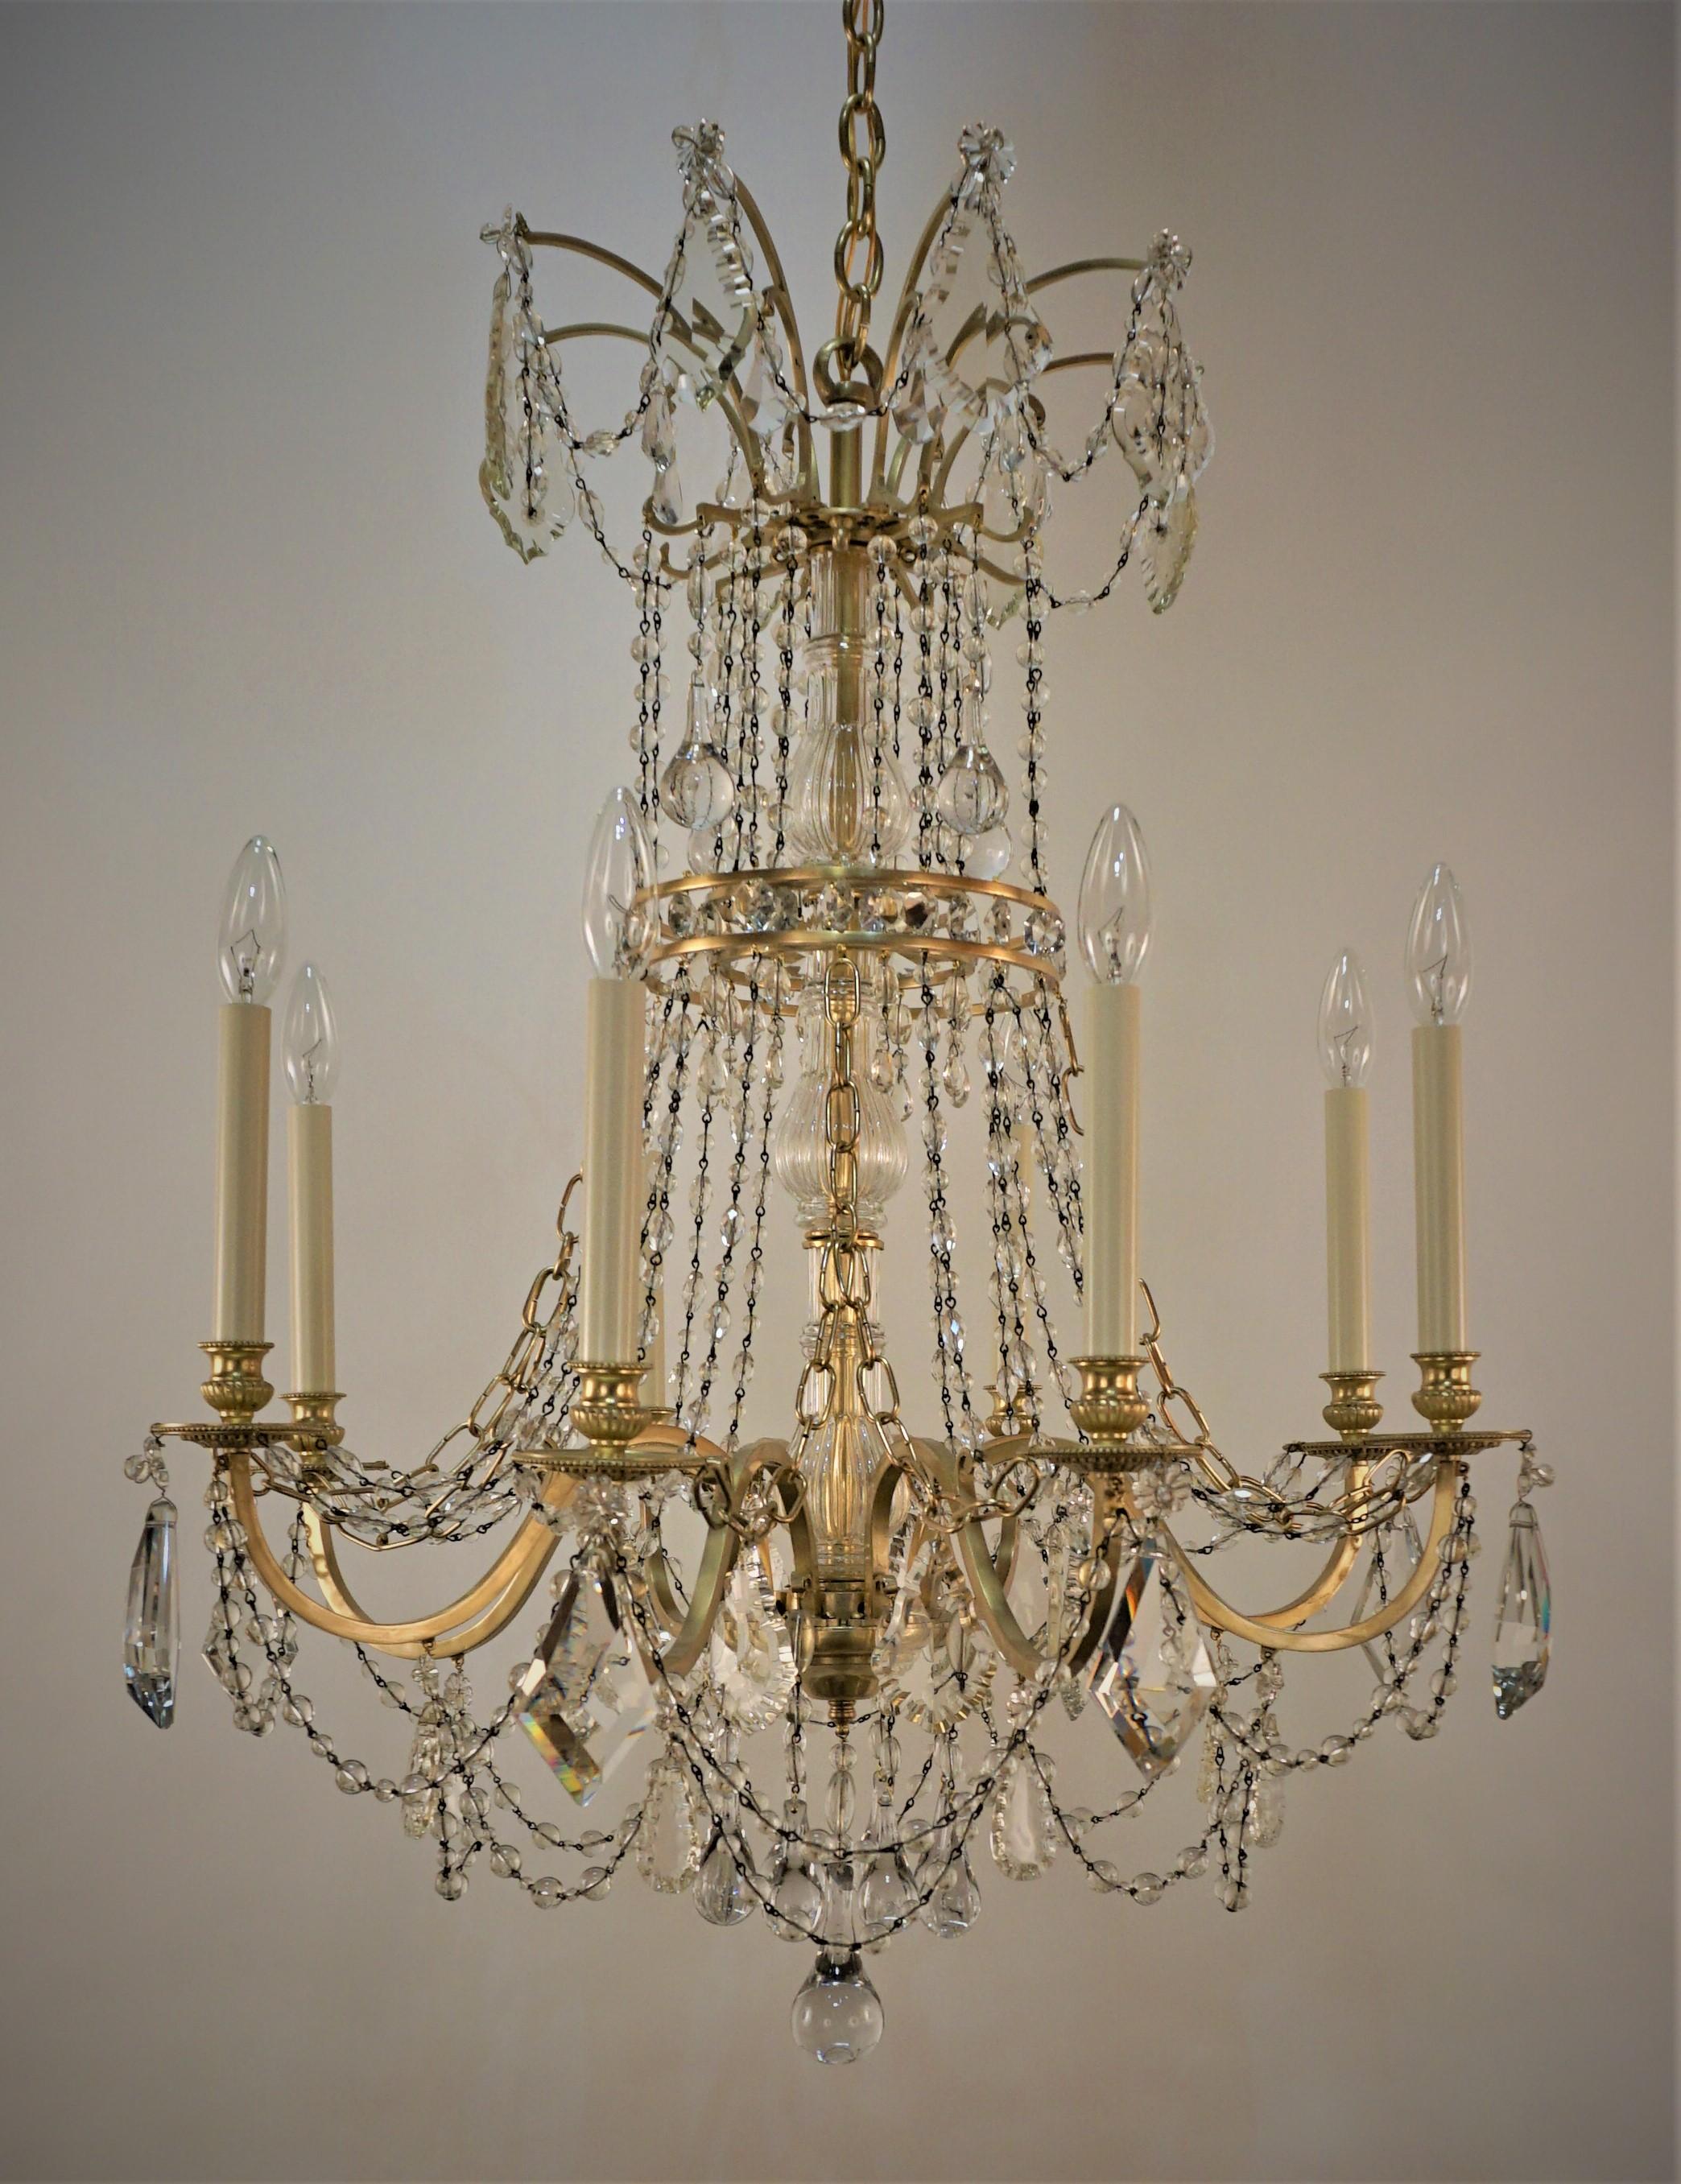 Bagues 1930s Crystal Chandelier In Good Condition For Sale In Fairfax, VA